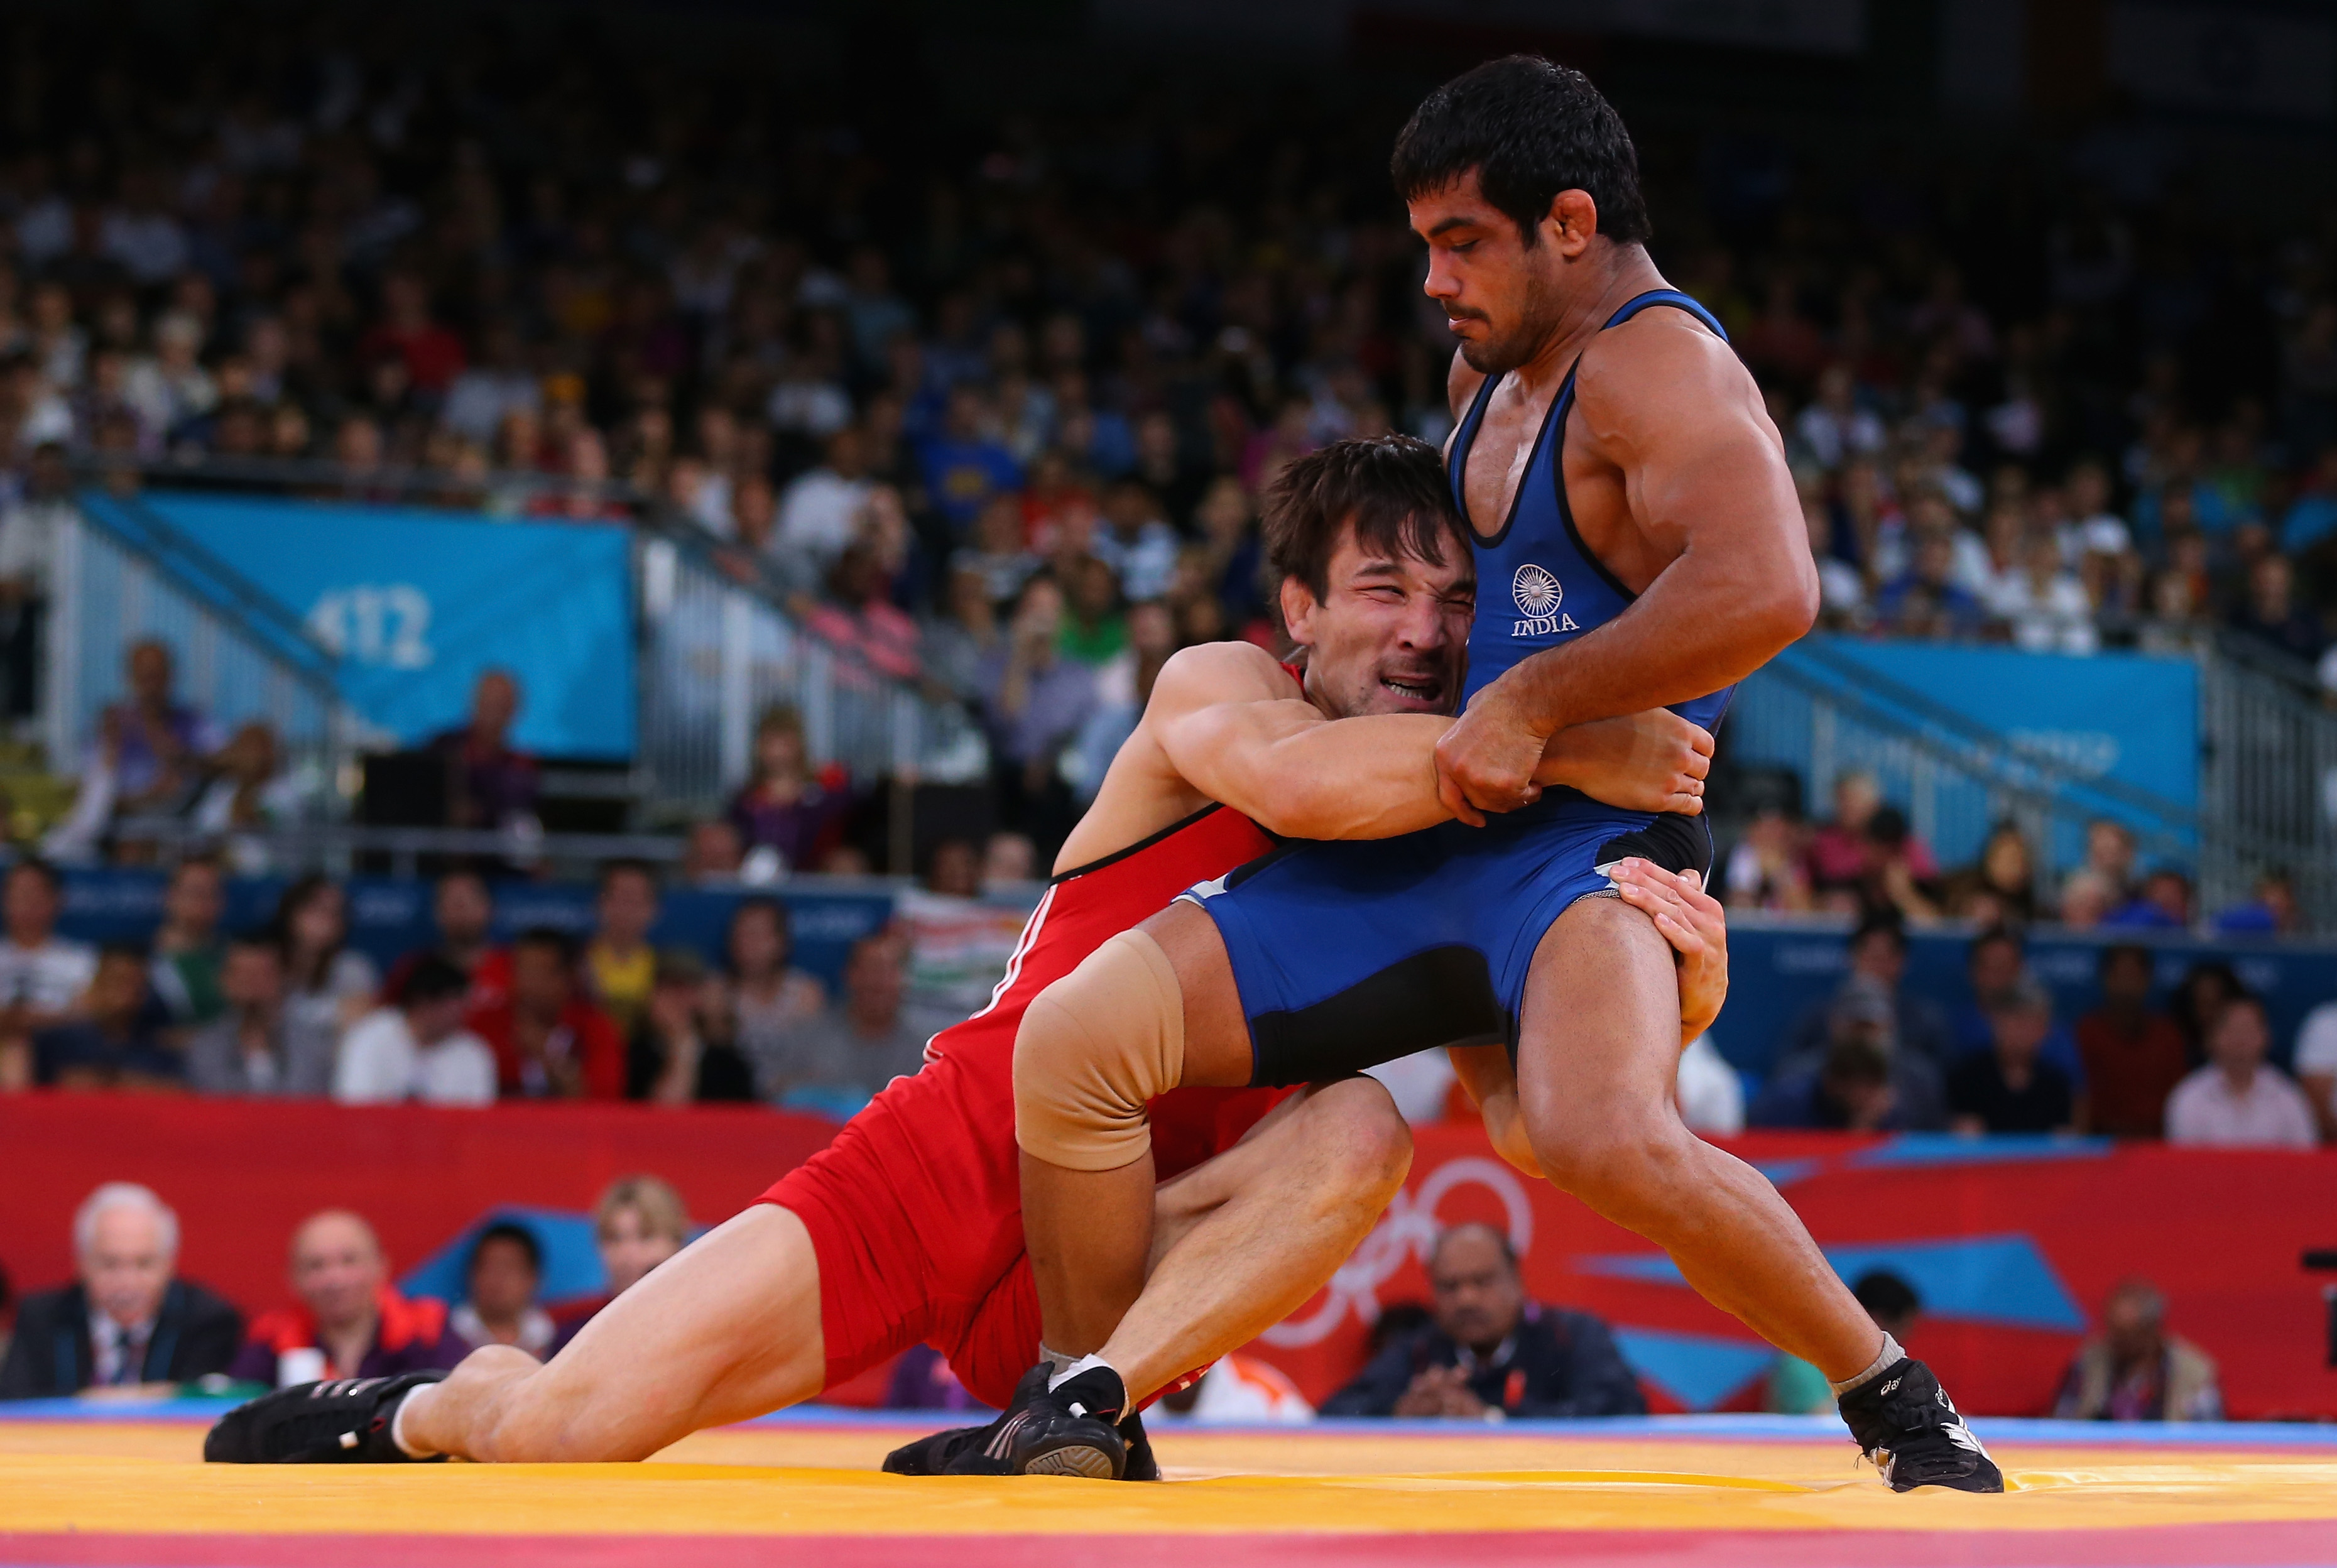 Sushil Kumar: Narsingh is not from Pakistan. Why wouldn't I support him?